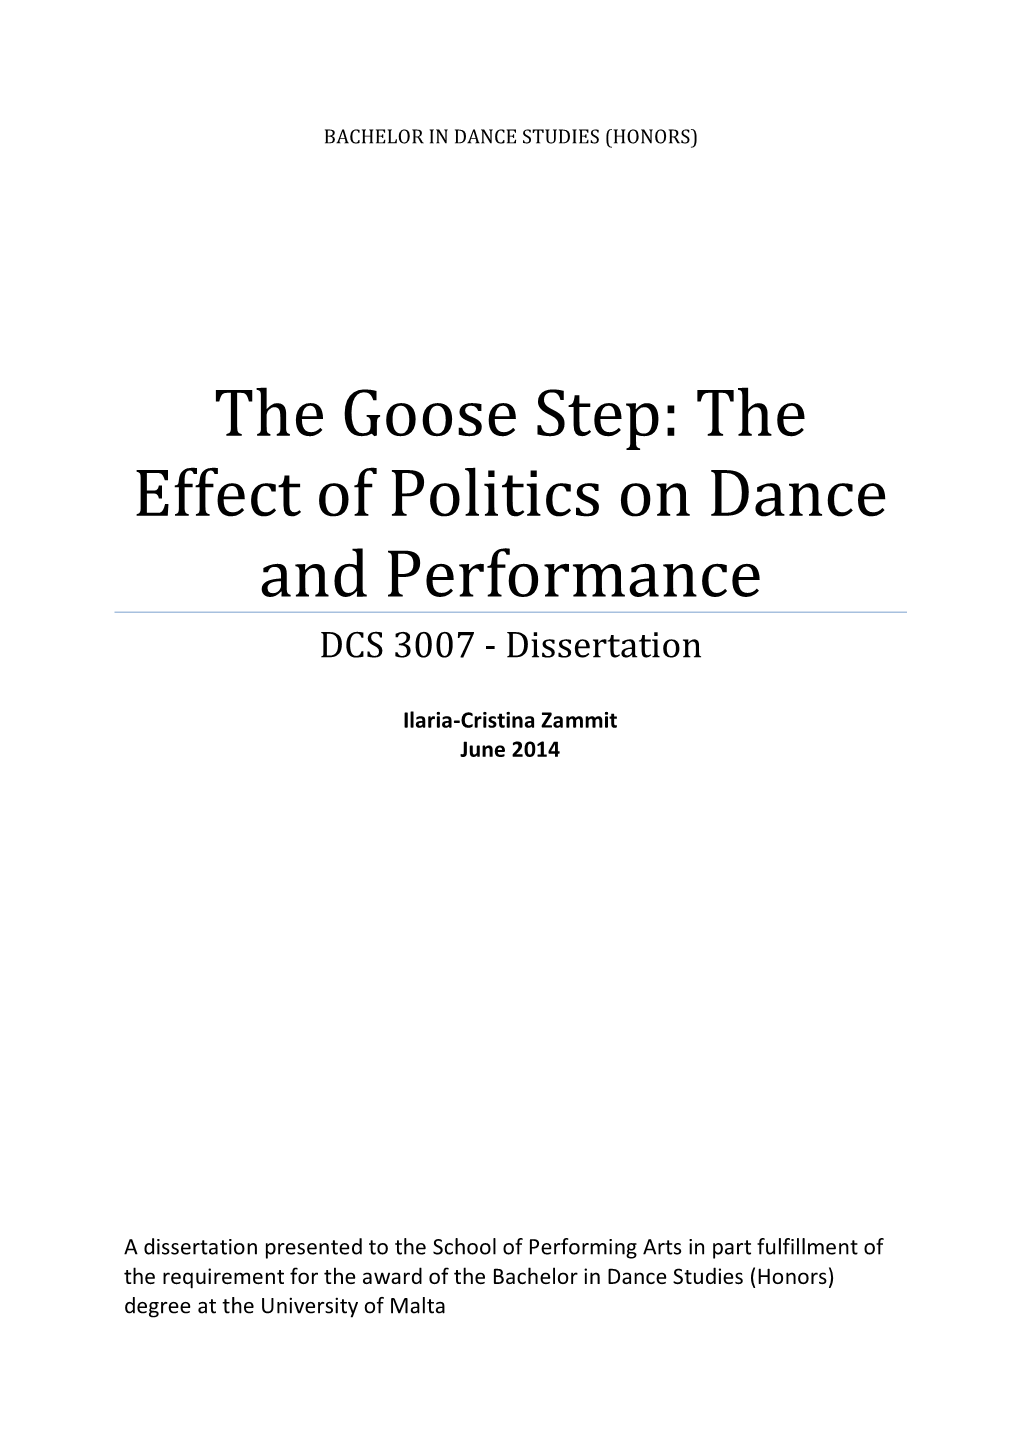 The Goose Step: the Effect of Politics on Dance and Performance DCS 3007 - Dissertation